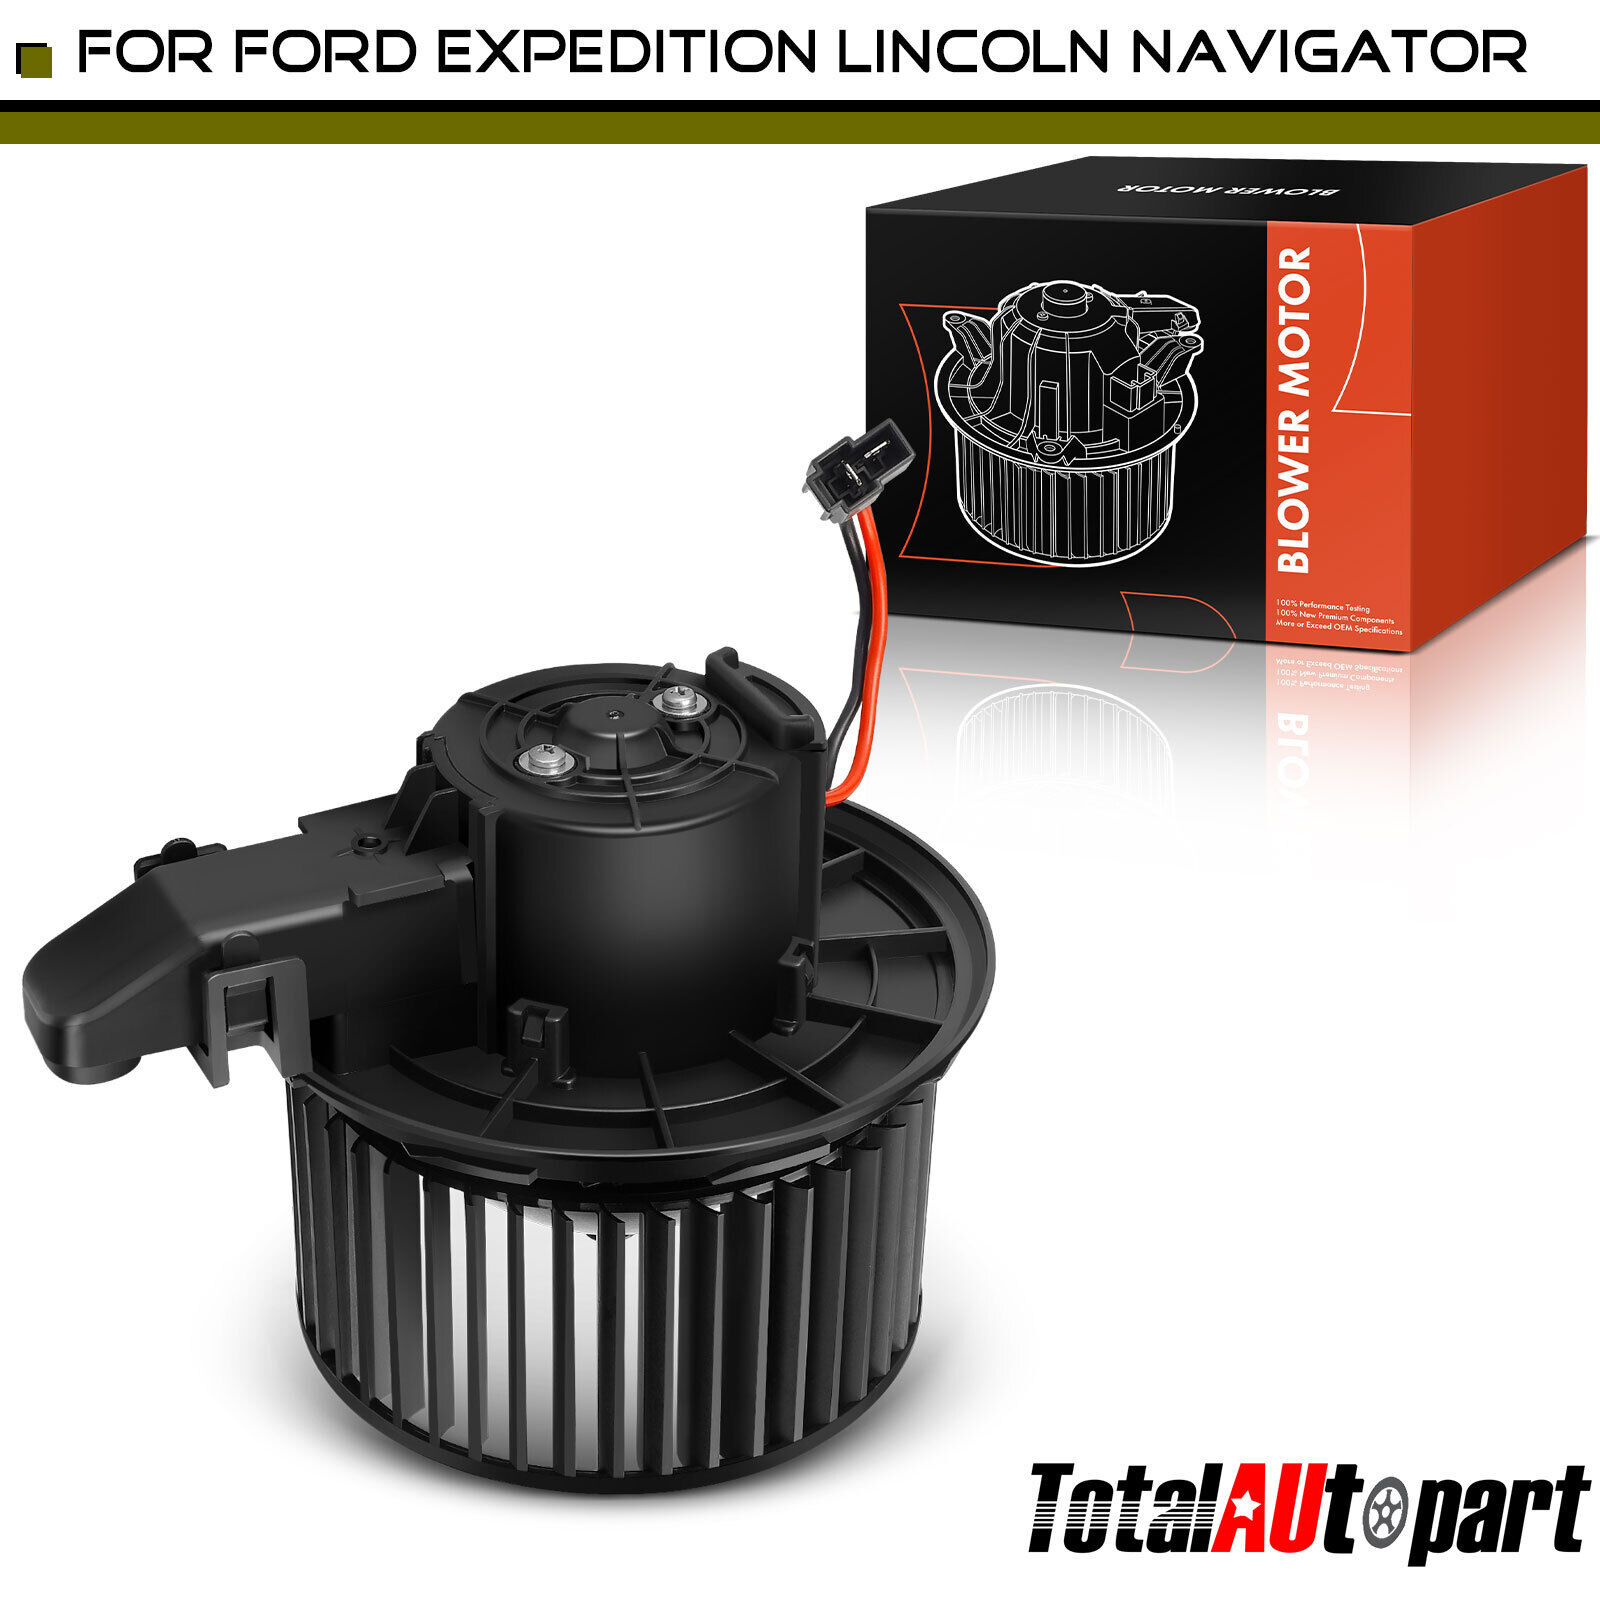 A/C Blower Motor W/ Fan Cage for Ford Expedition Lincoln Navigator 07-08 700225